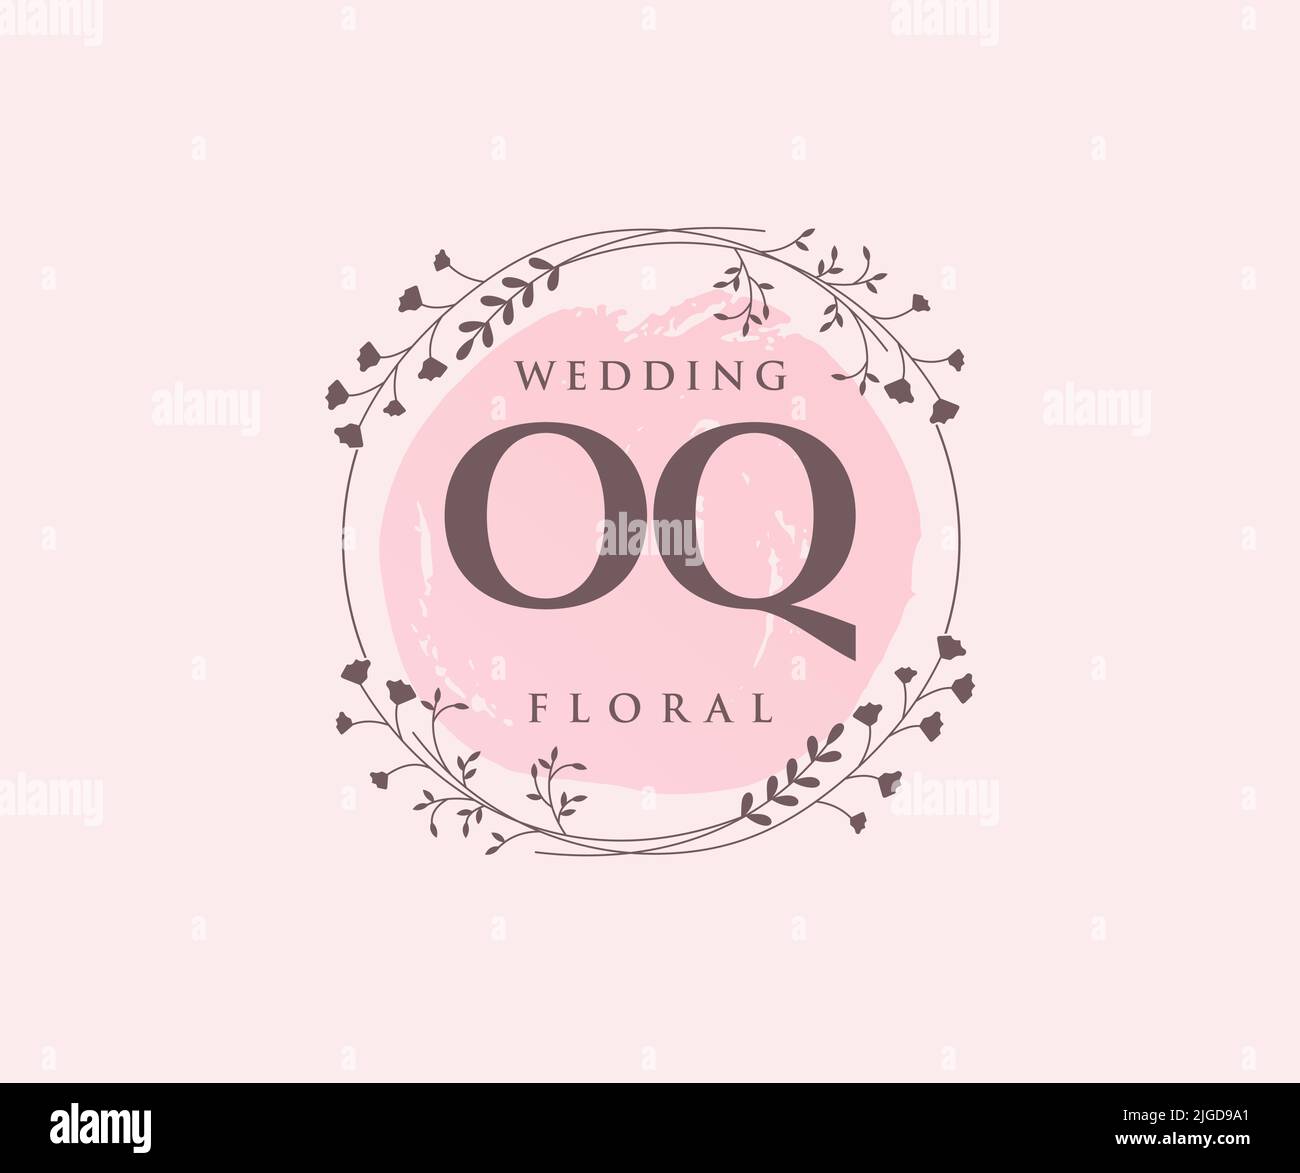 OQ Initials letter Wedding monogram logos template, hand drawn modern minimalistic and floral templates for Invitation cards, Save the Date, elegant Stock Vector